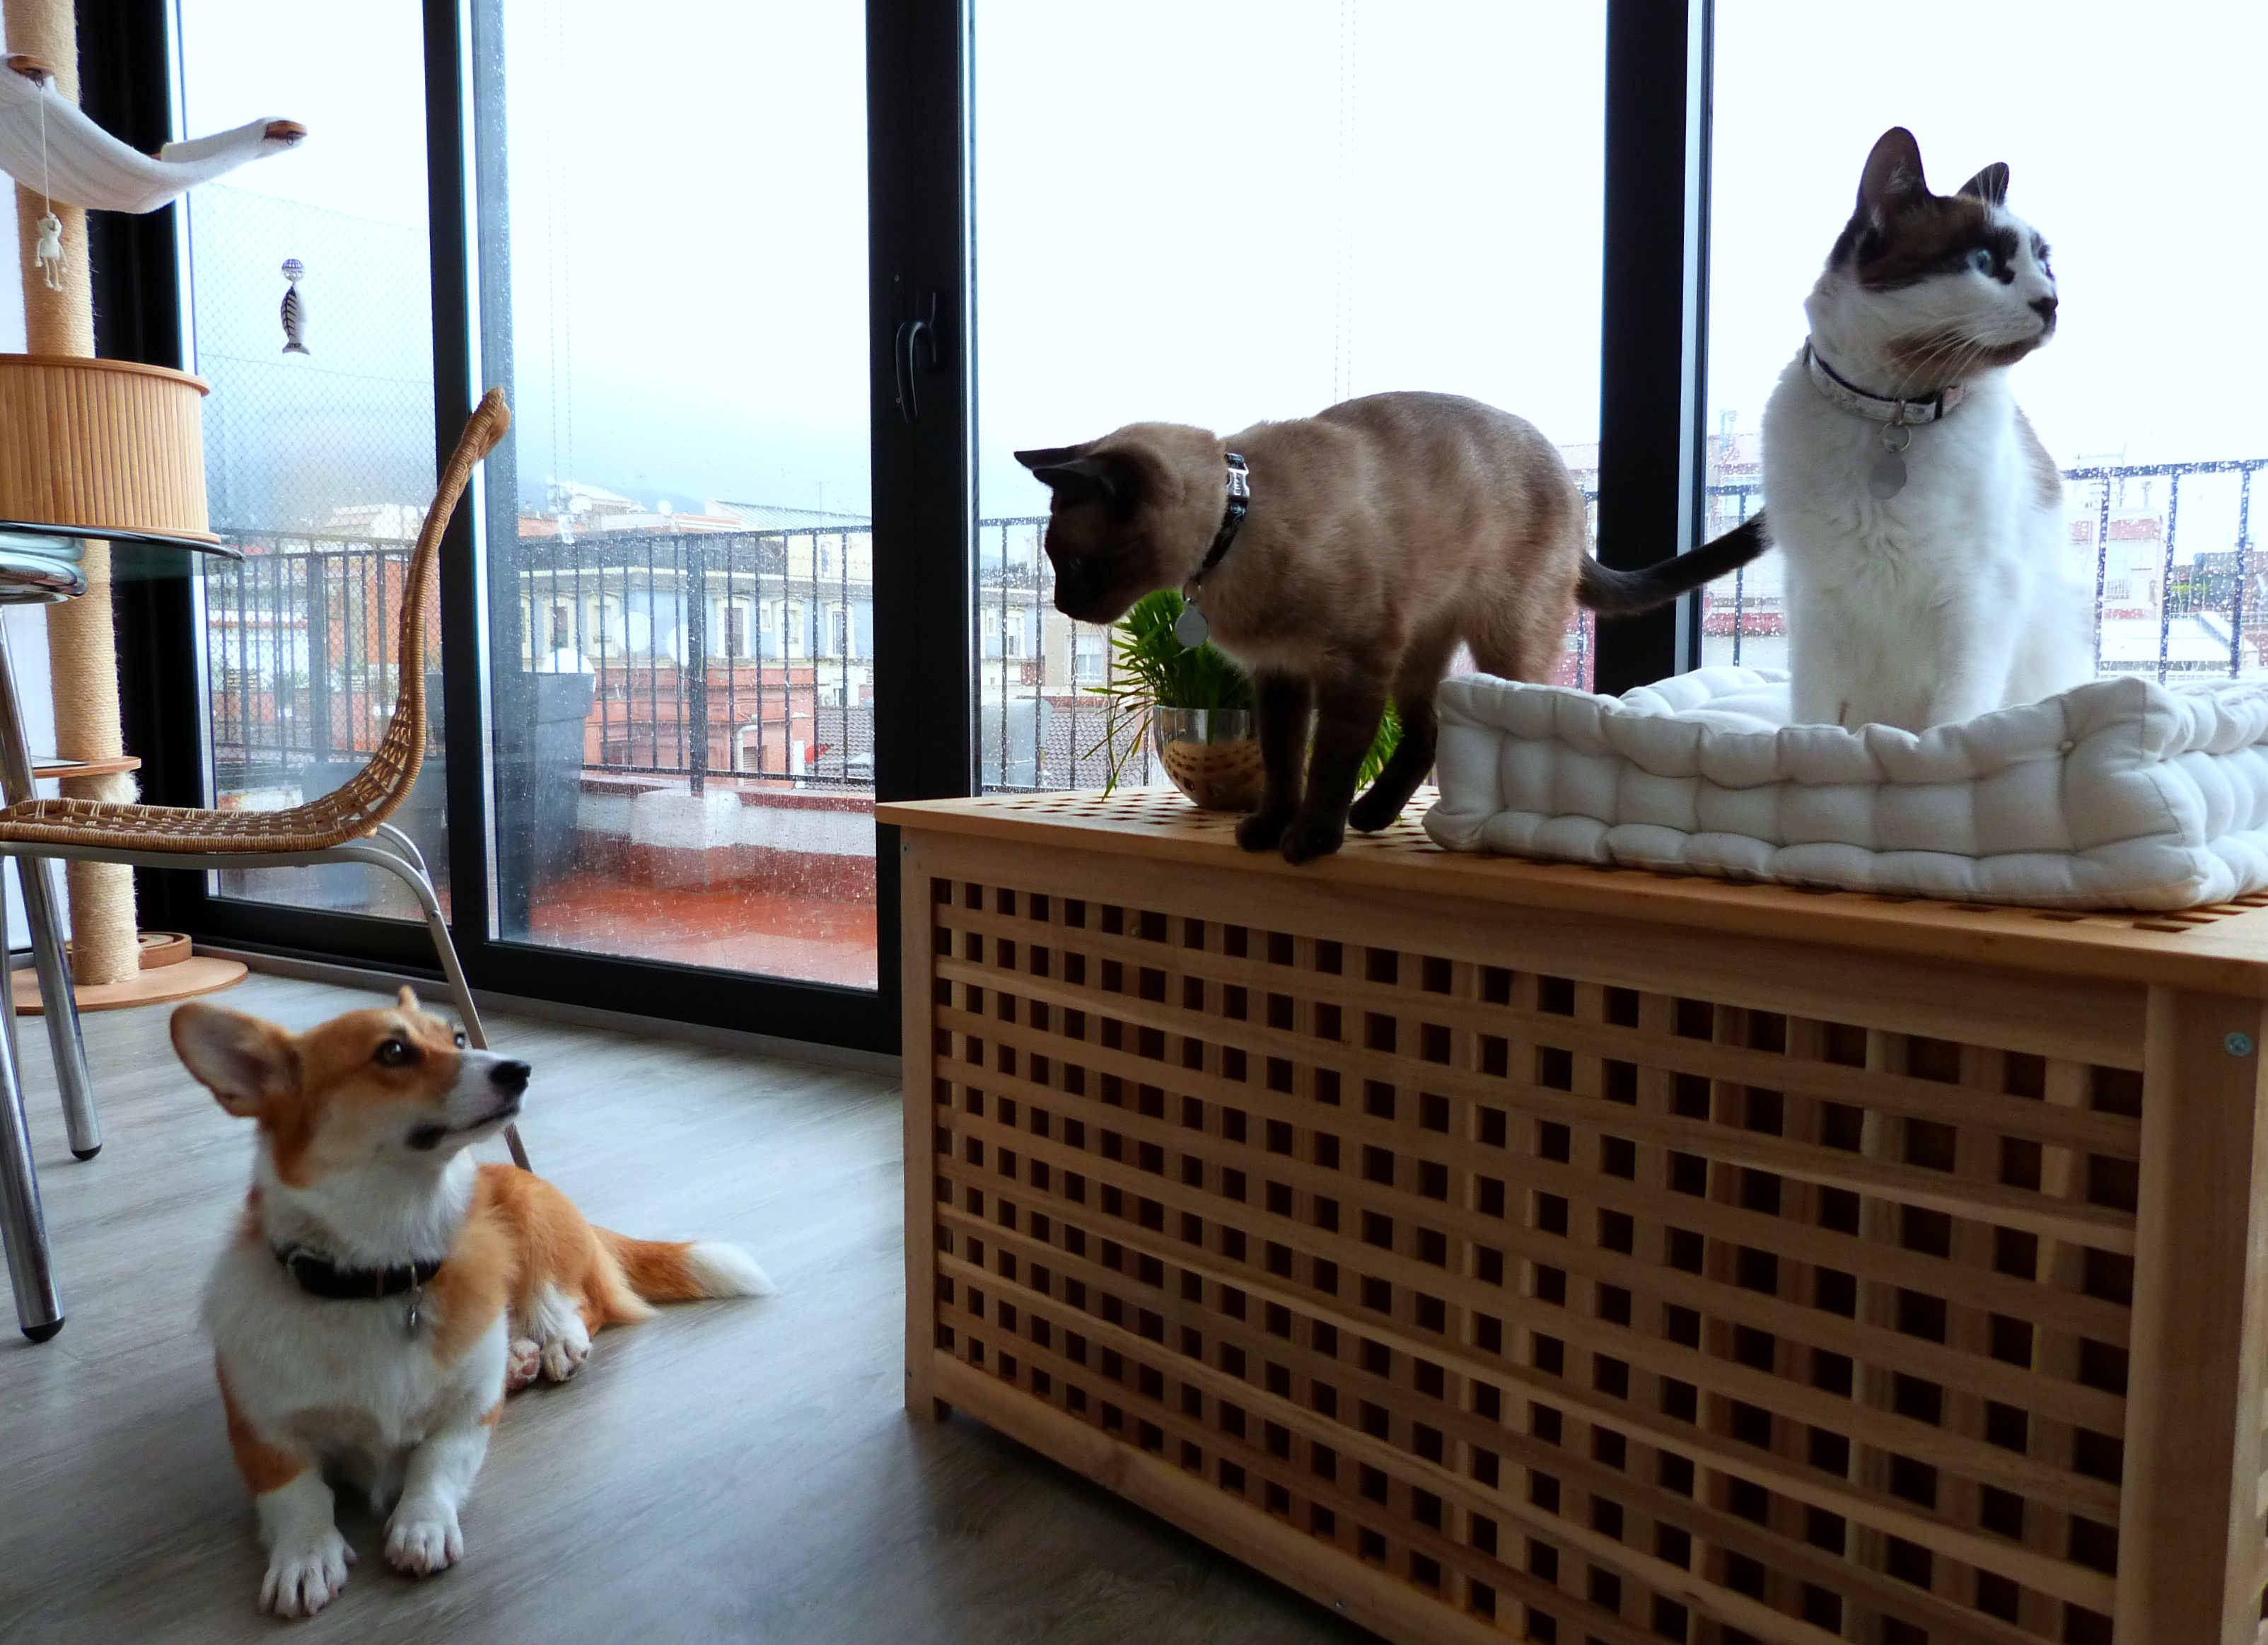 A rainy day in our little aquarium, Animal, Cat, Day, Dog, HQ Photo